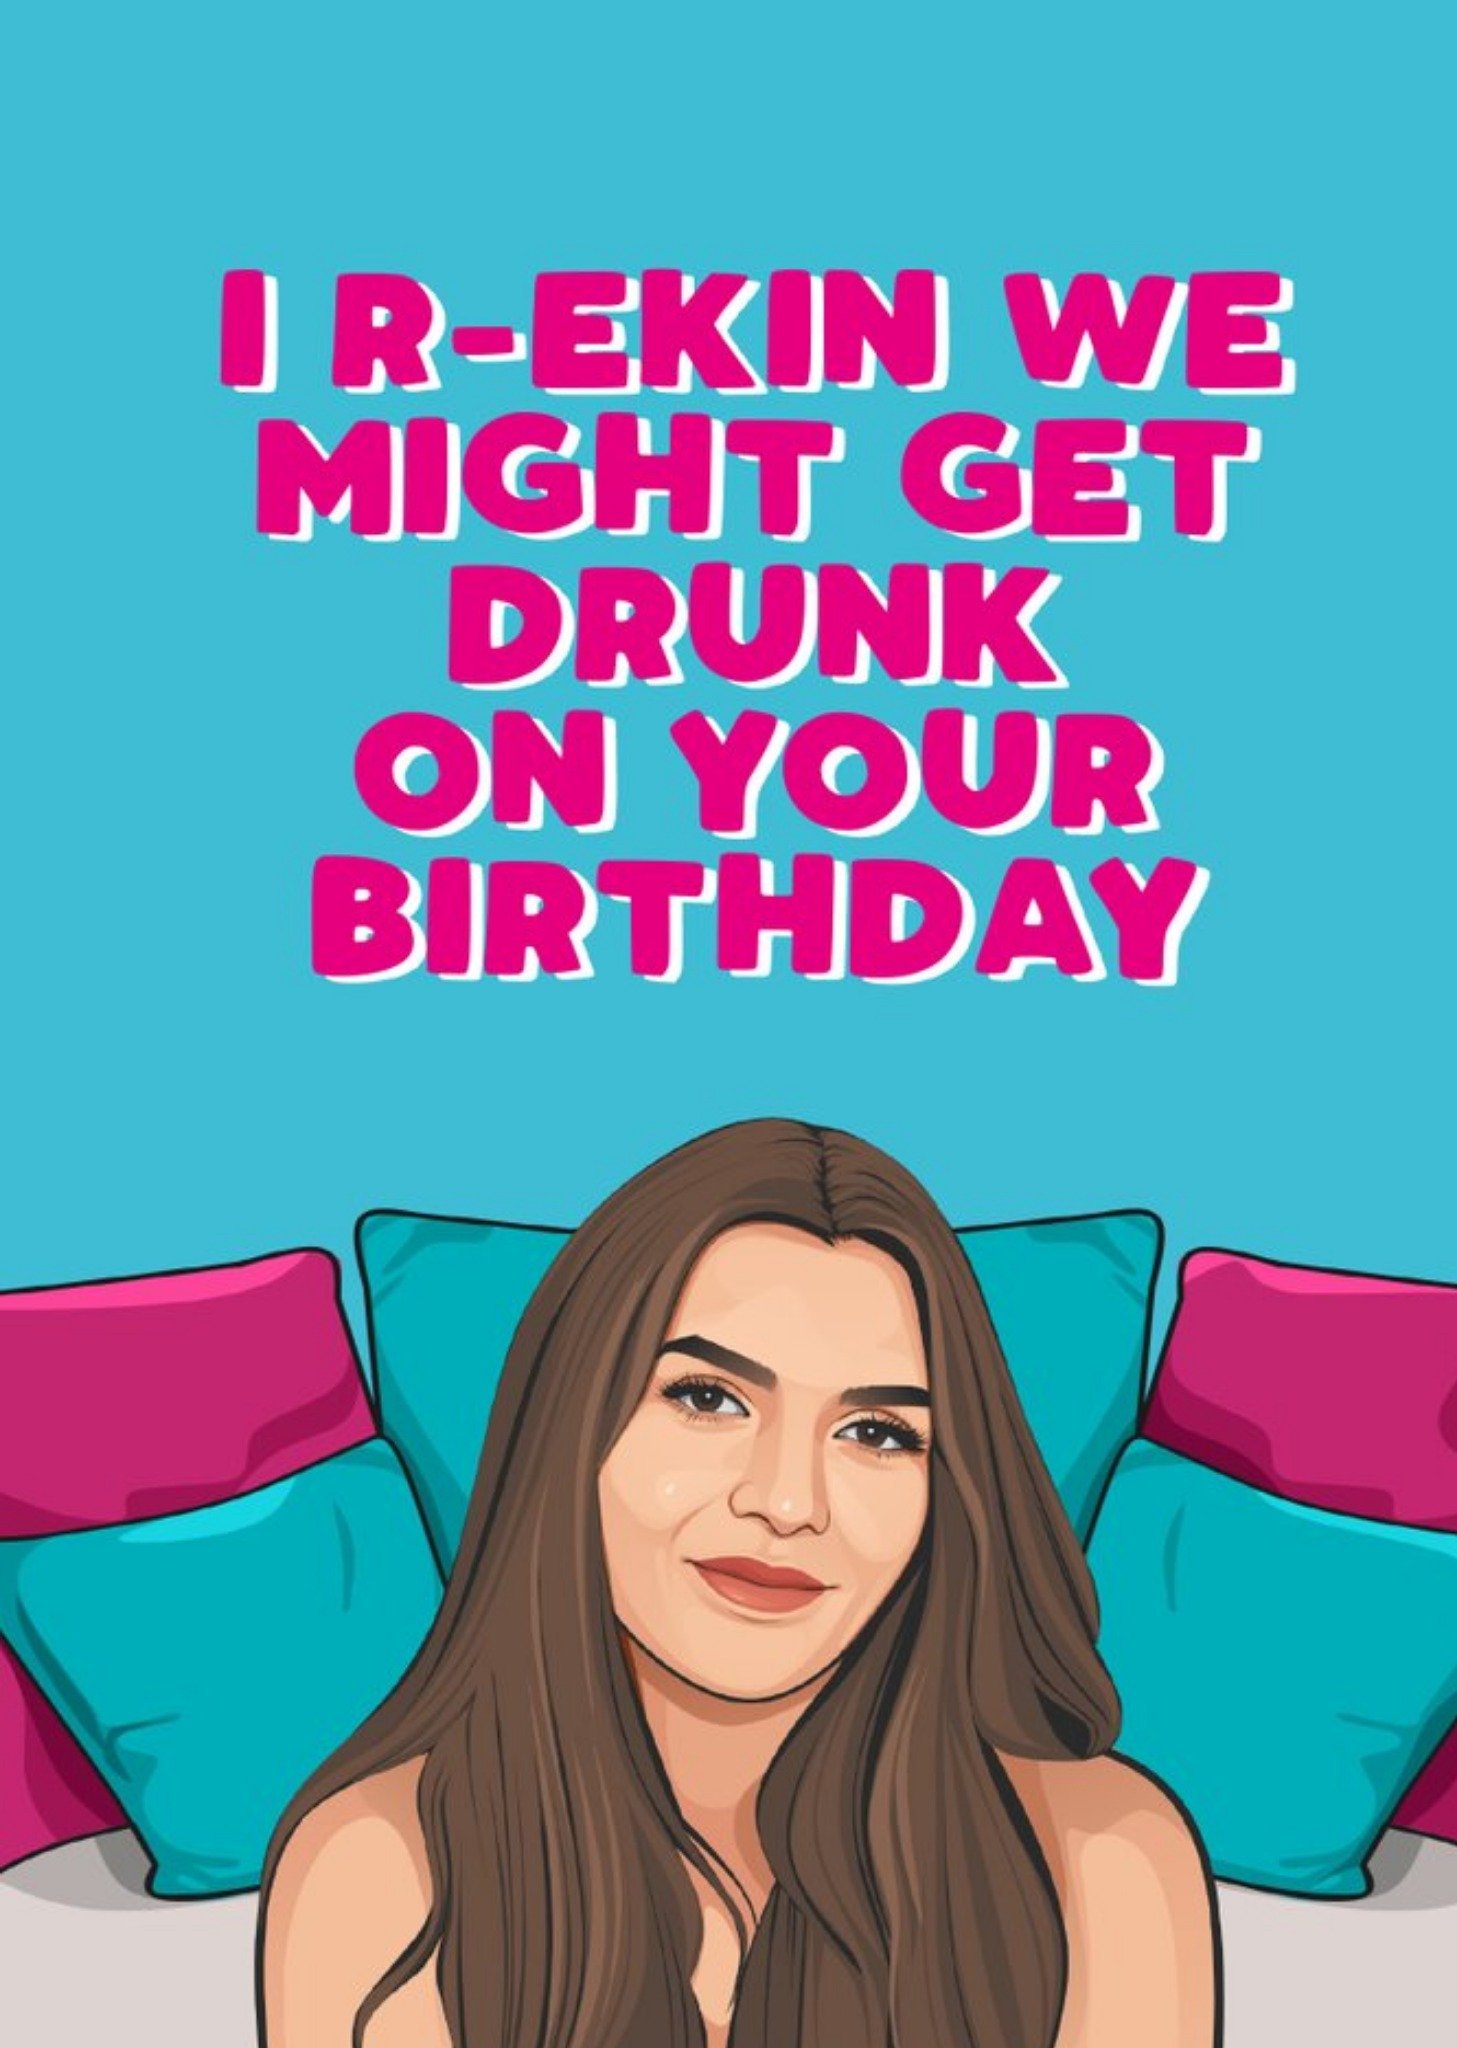 Filthy Sentiments Reckon We Might Get Drunk Birthday Card, Large